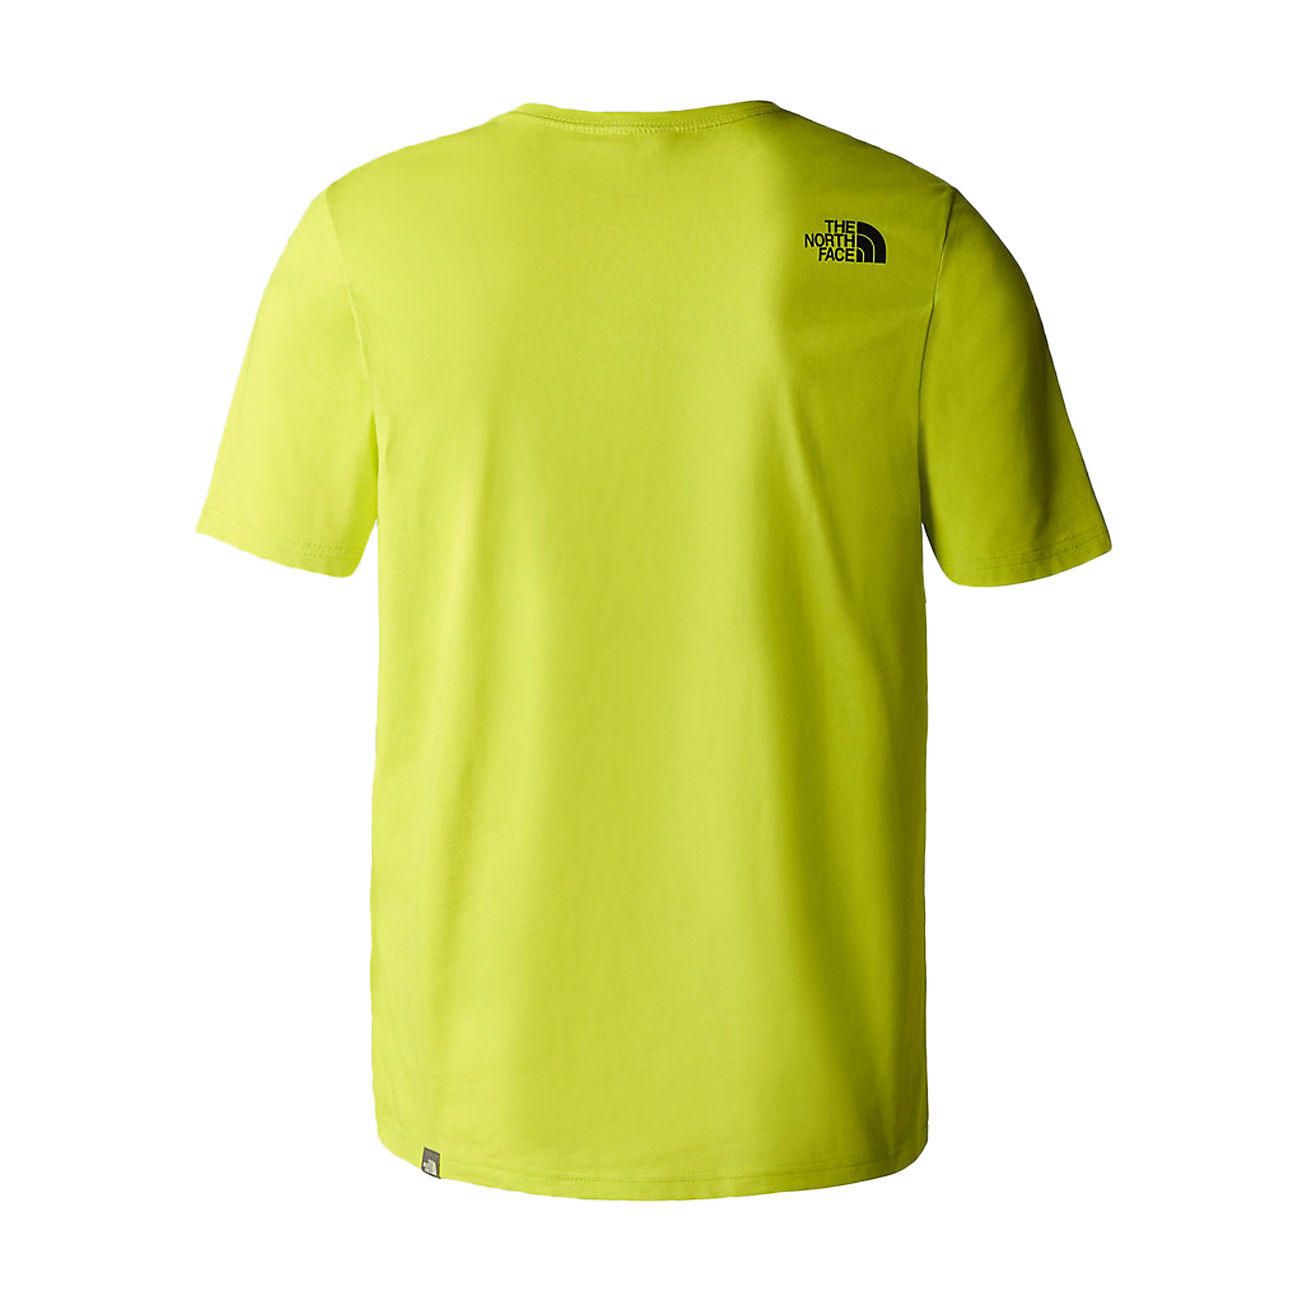 THE NORTH FACE TSHIRT EASY IN COTTON Man Led Yellow